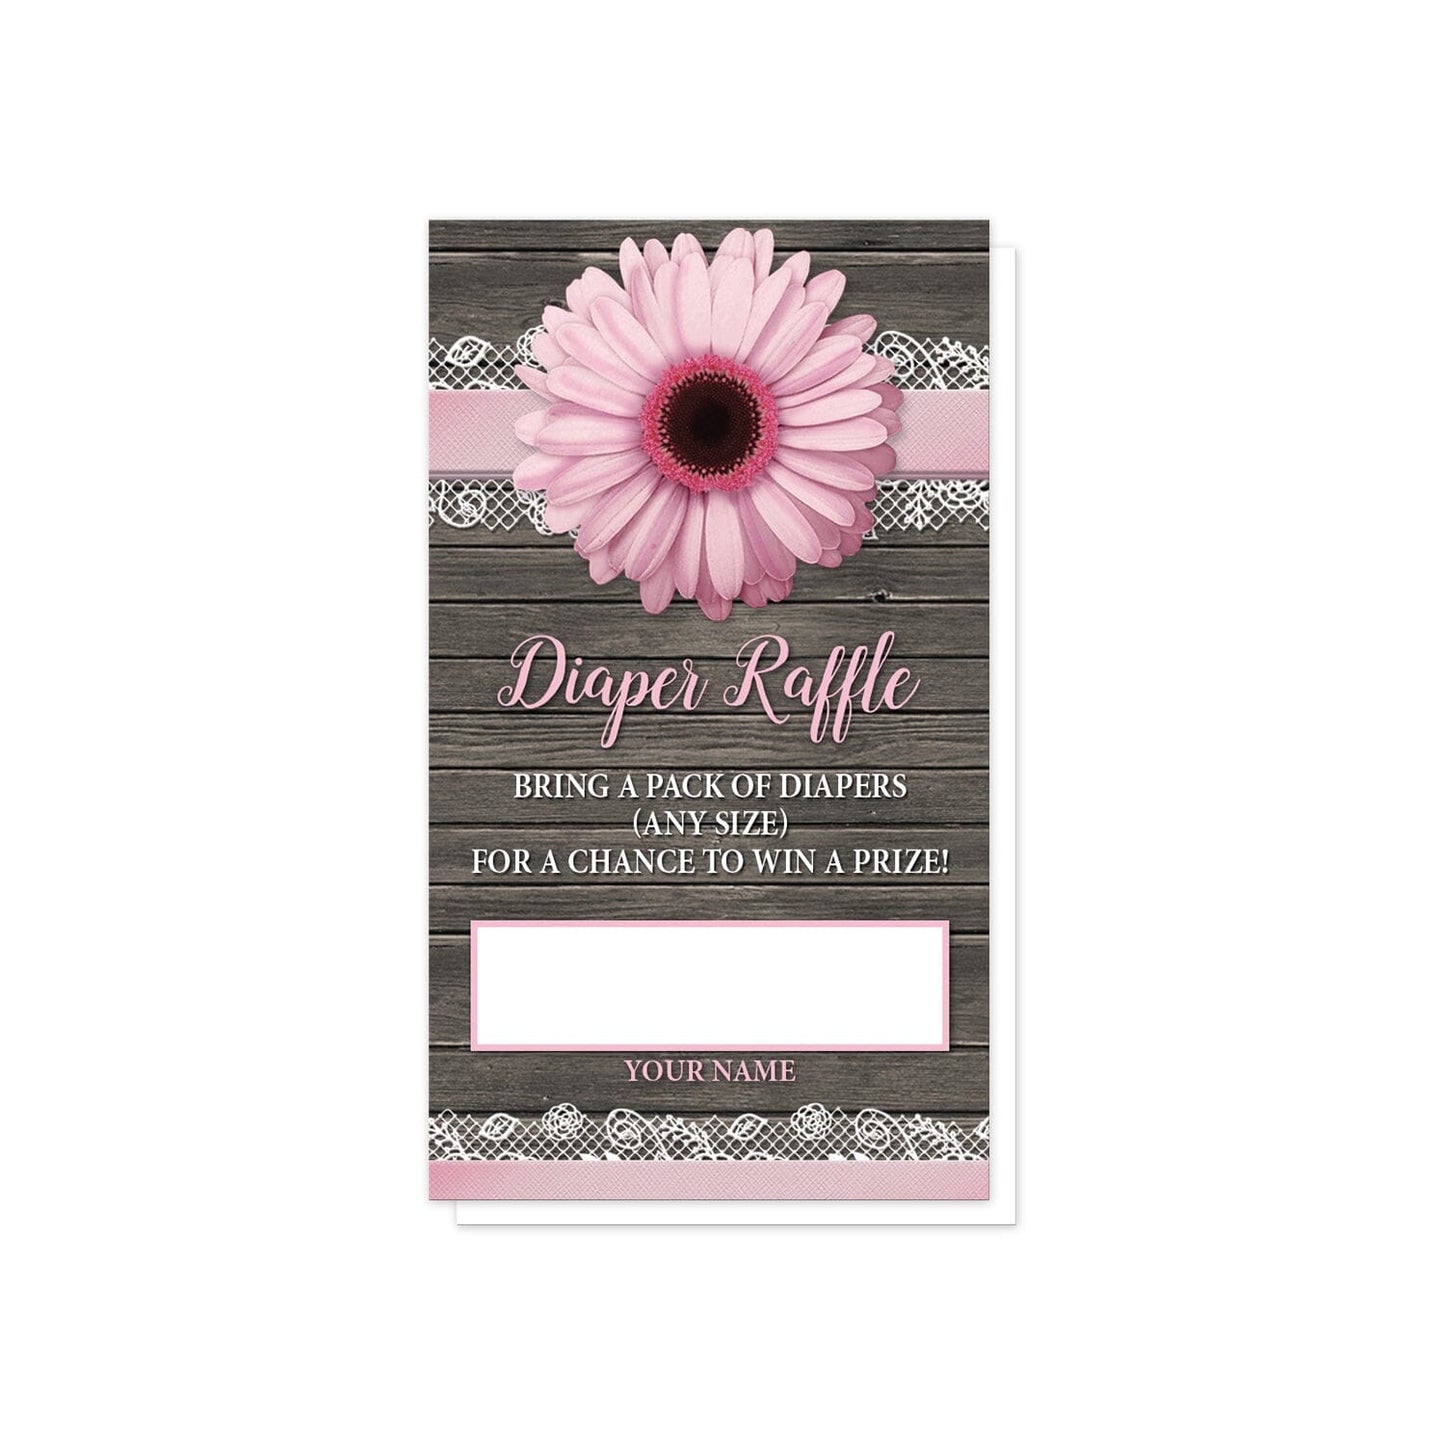 Pink Daisy Lace Rustic Wood Diaper Raffle Cards at Artistically Invited. Southern-inspired pink daisy lace rustic wood bring a book cards designed with a pink daisy flower centered at the top on a pink and white lace ribbon illustration, over a country brown wood background. Your diaper raffle details are printed in pink and white with a white box for the name over the wood background below the pretty pink daisy.